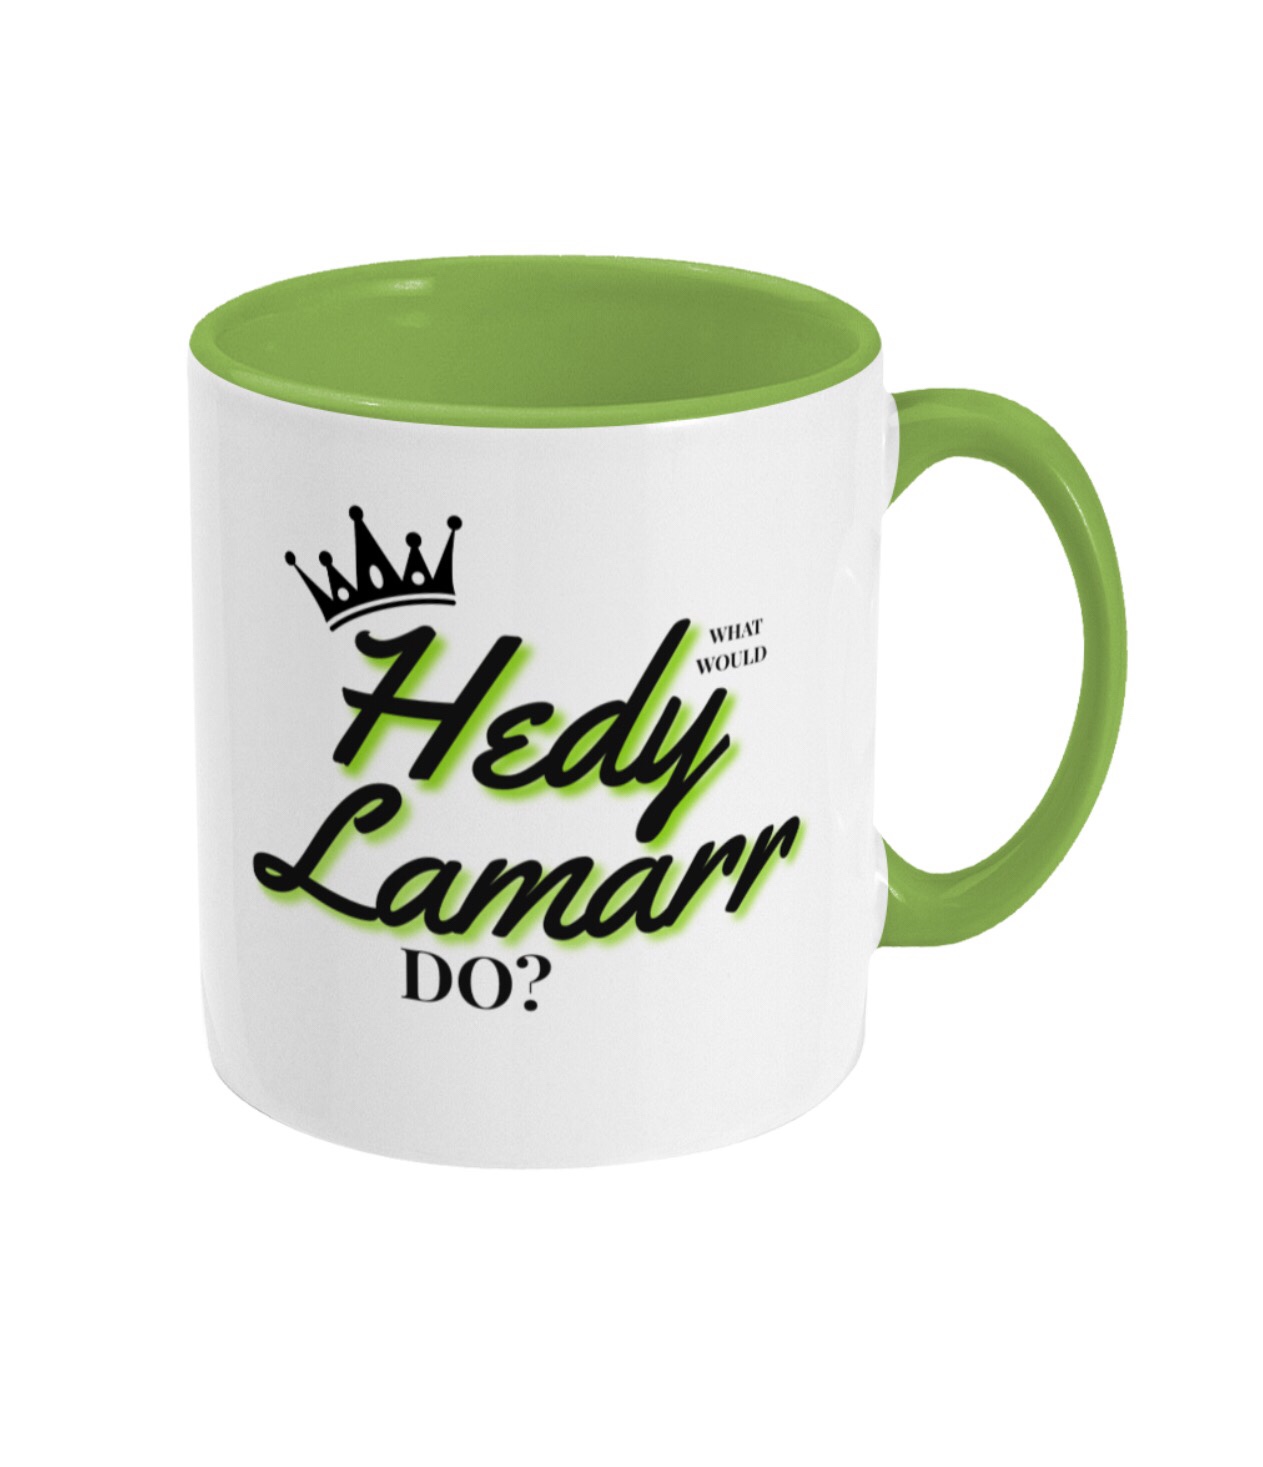 What Would Hedy Lamarr Do? Two toned green mug